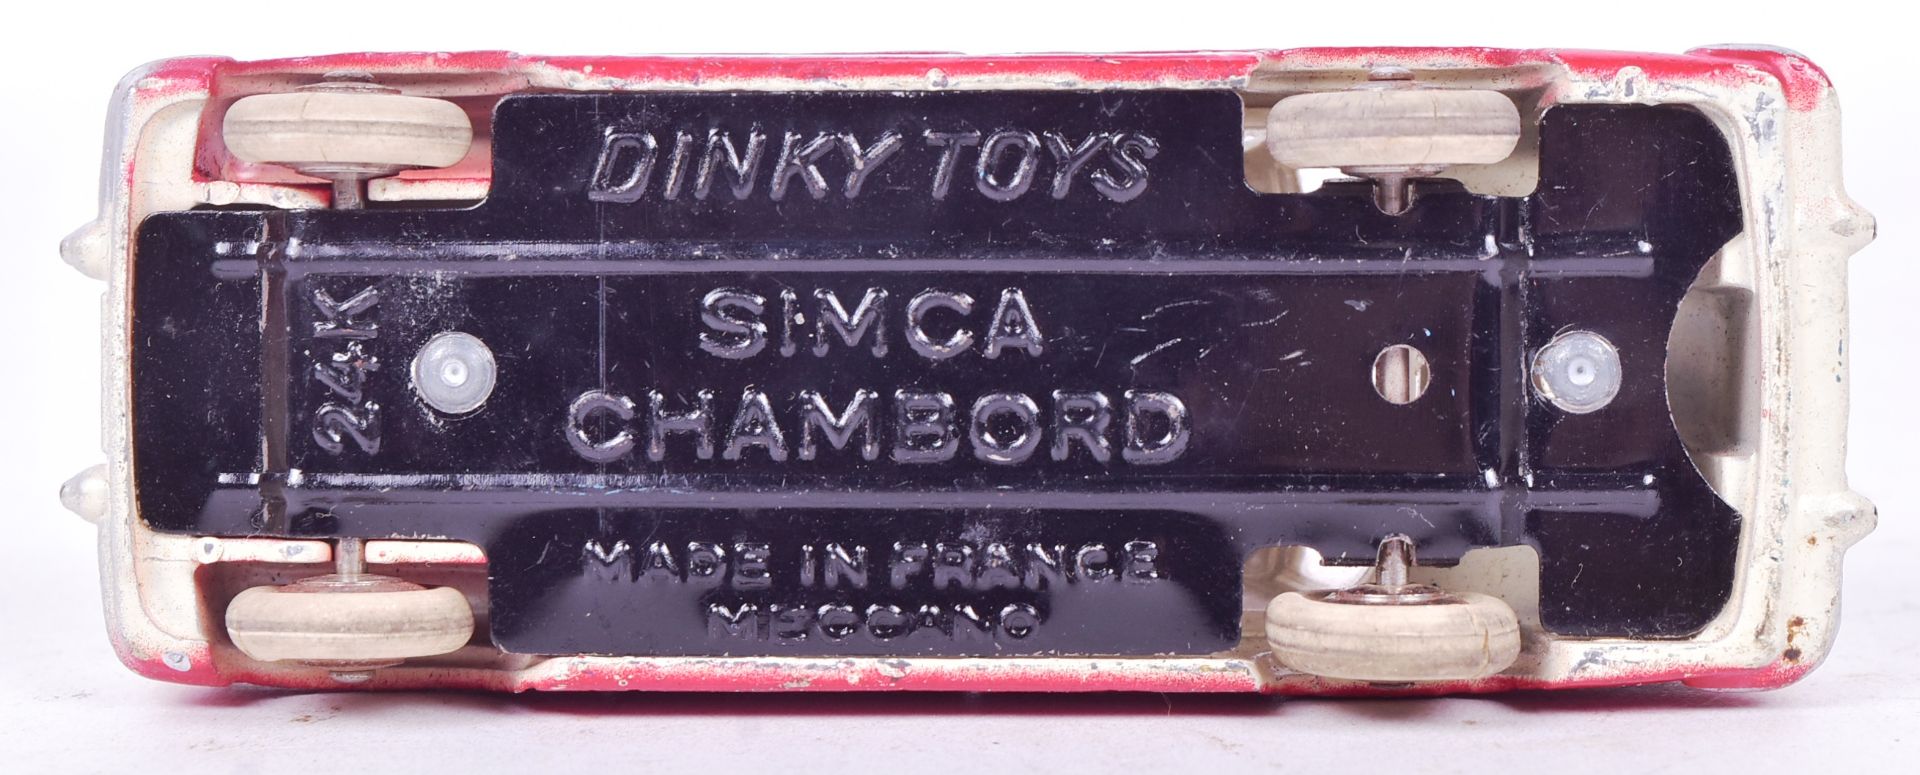 DIECAST - FRENCH DINKY TOYS - SIMCA CHAMBORD - Image 5 of 5